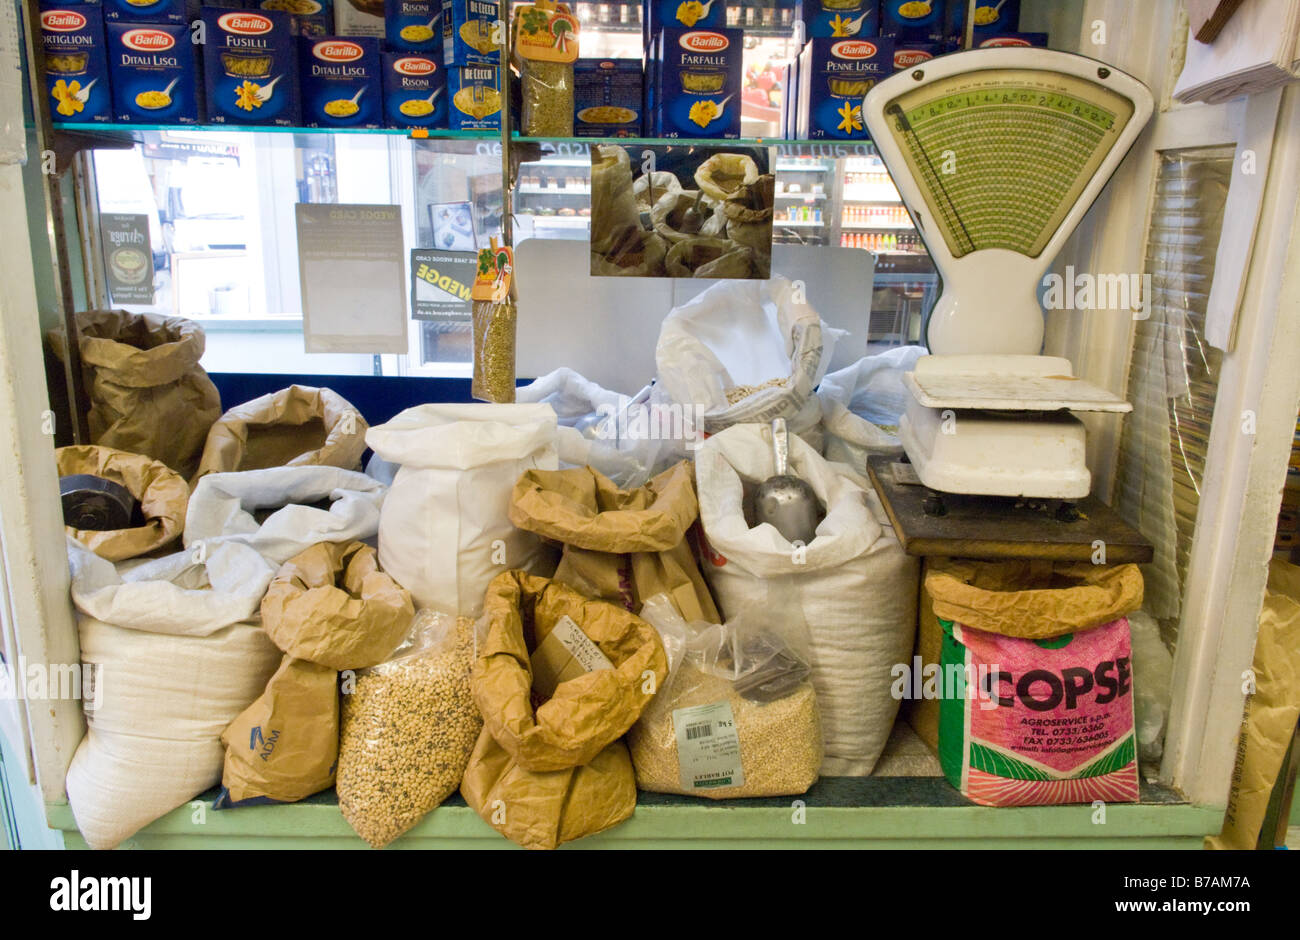 A deli shop with dried food and pasta for sale, an old fashioned deli delicatessen shop. Stock Photo